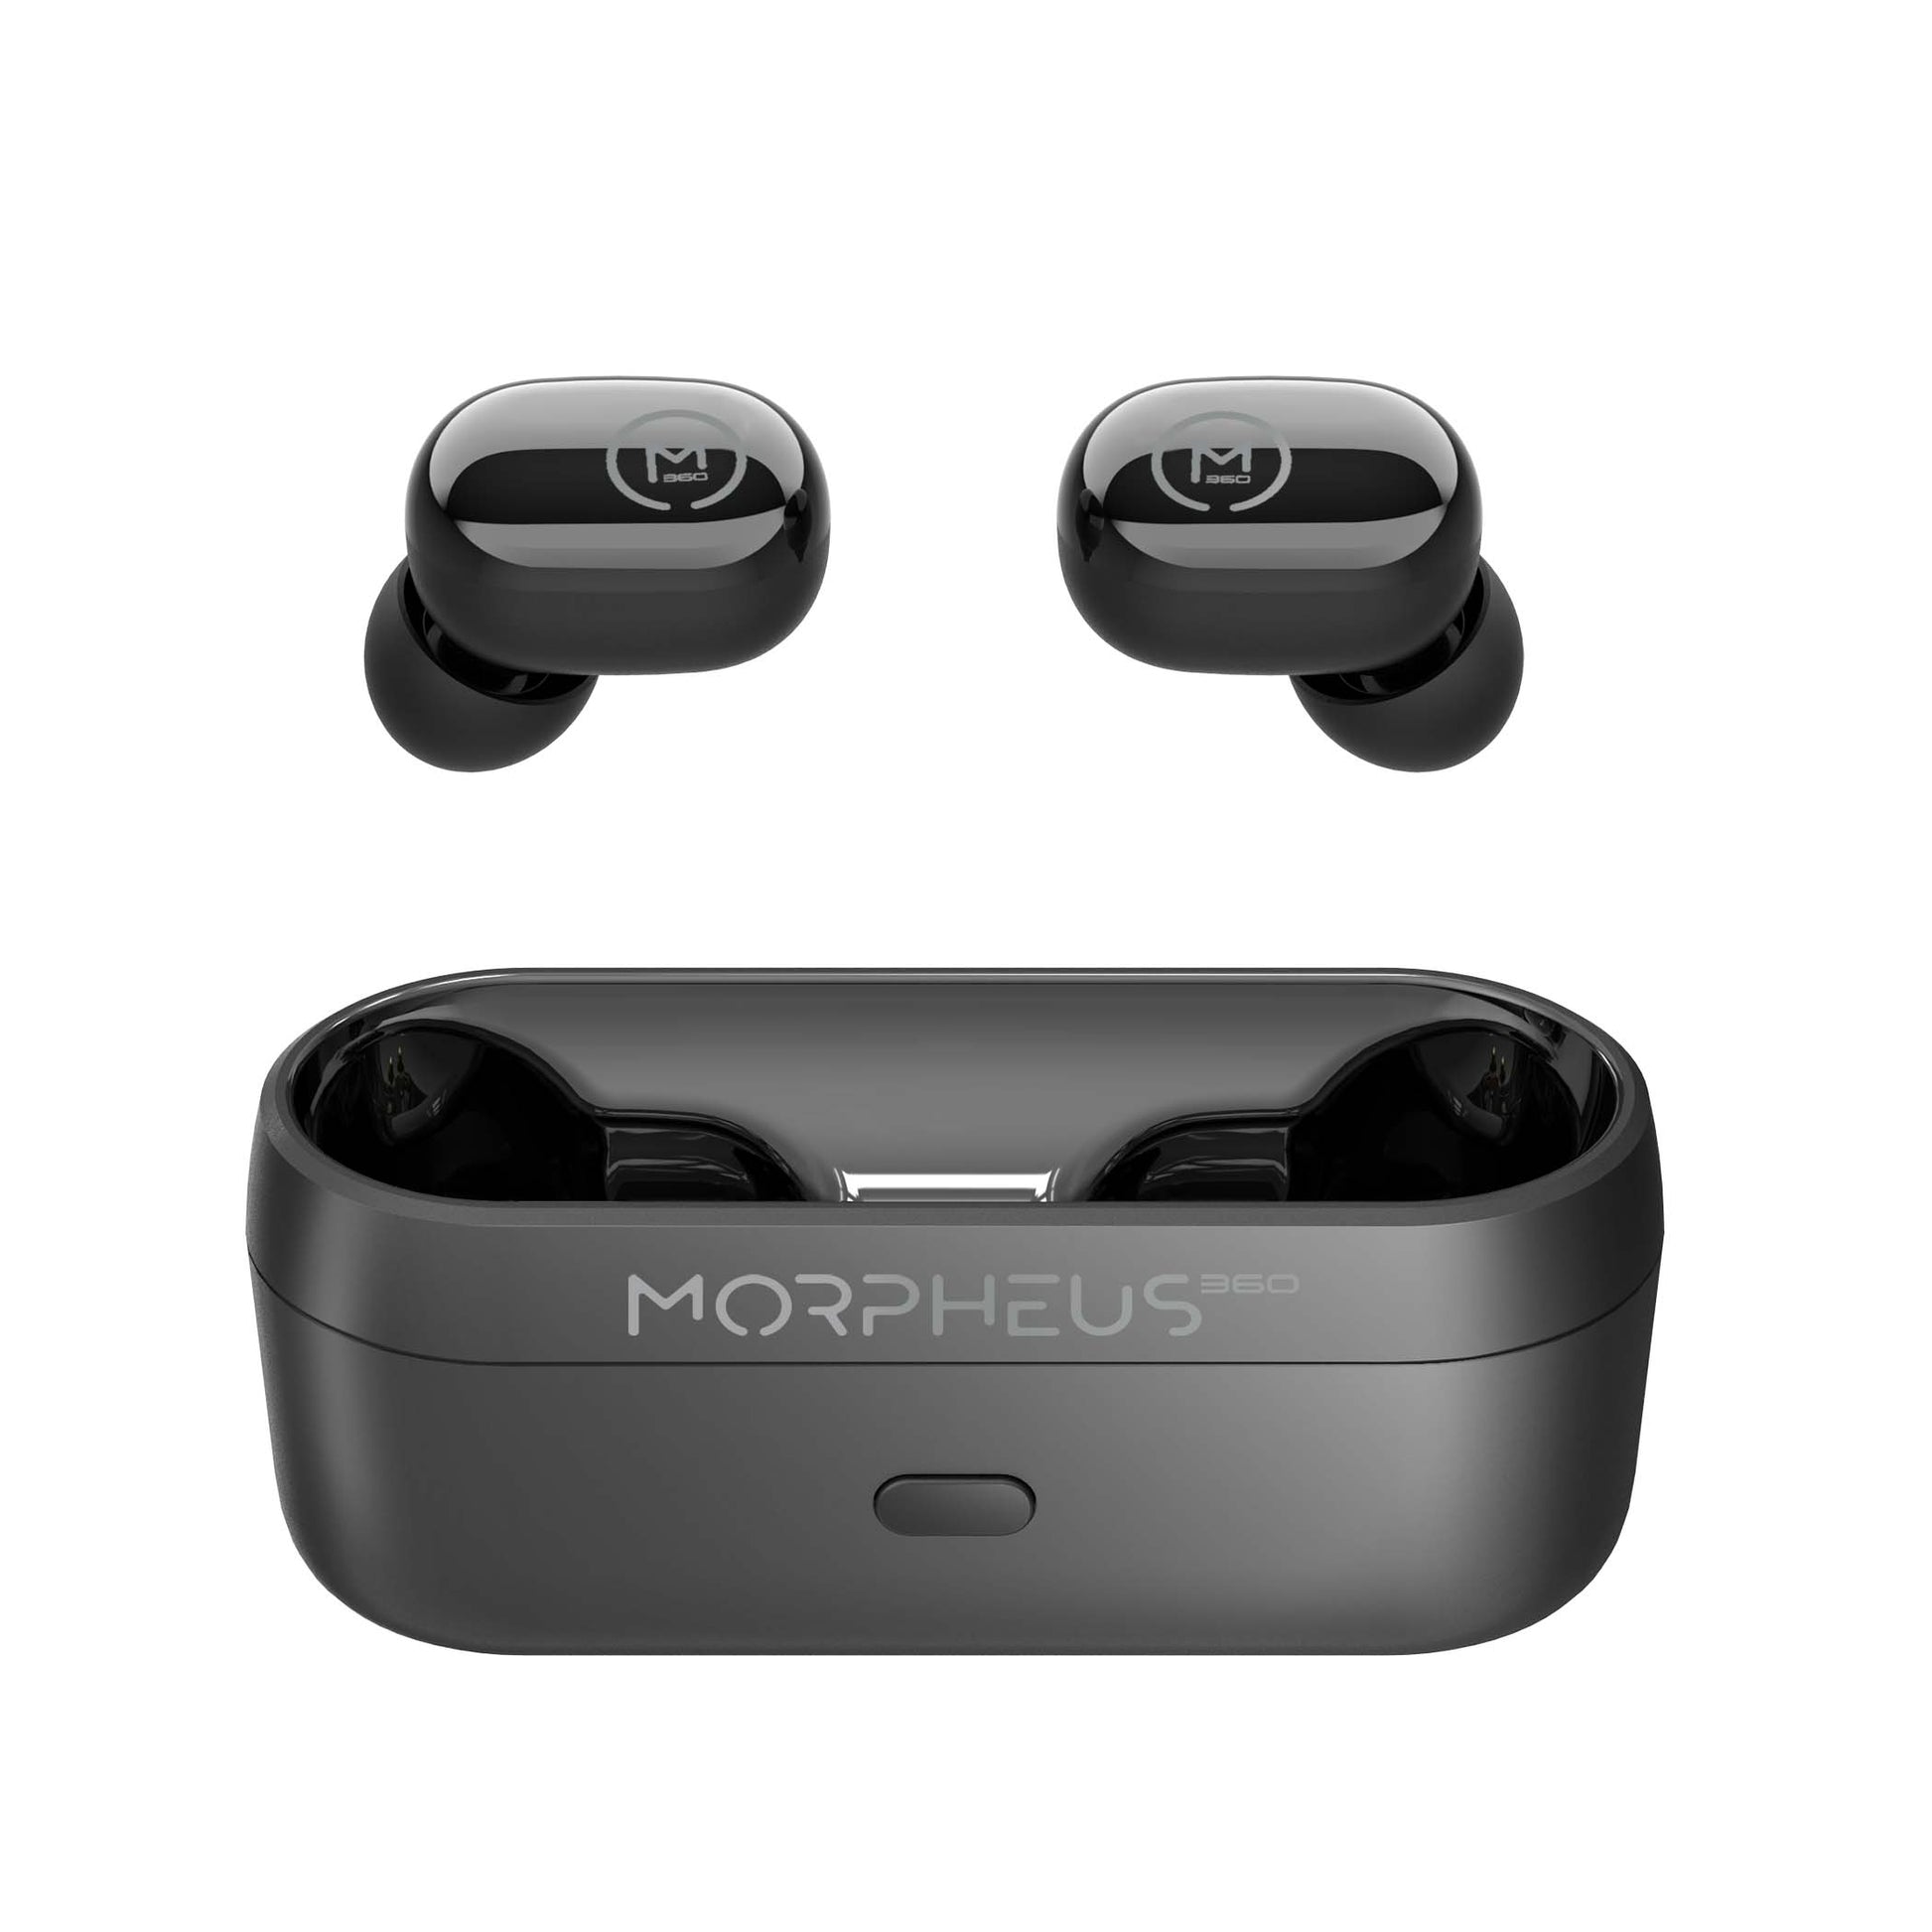 Photo of Morpheus 360 Spire True Wireless Earbuds, Black left and right button earbuds with charging case.